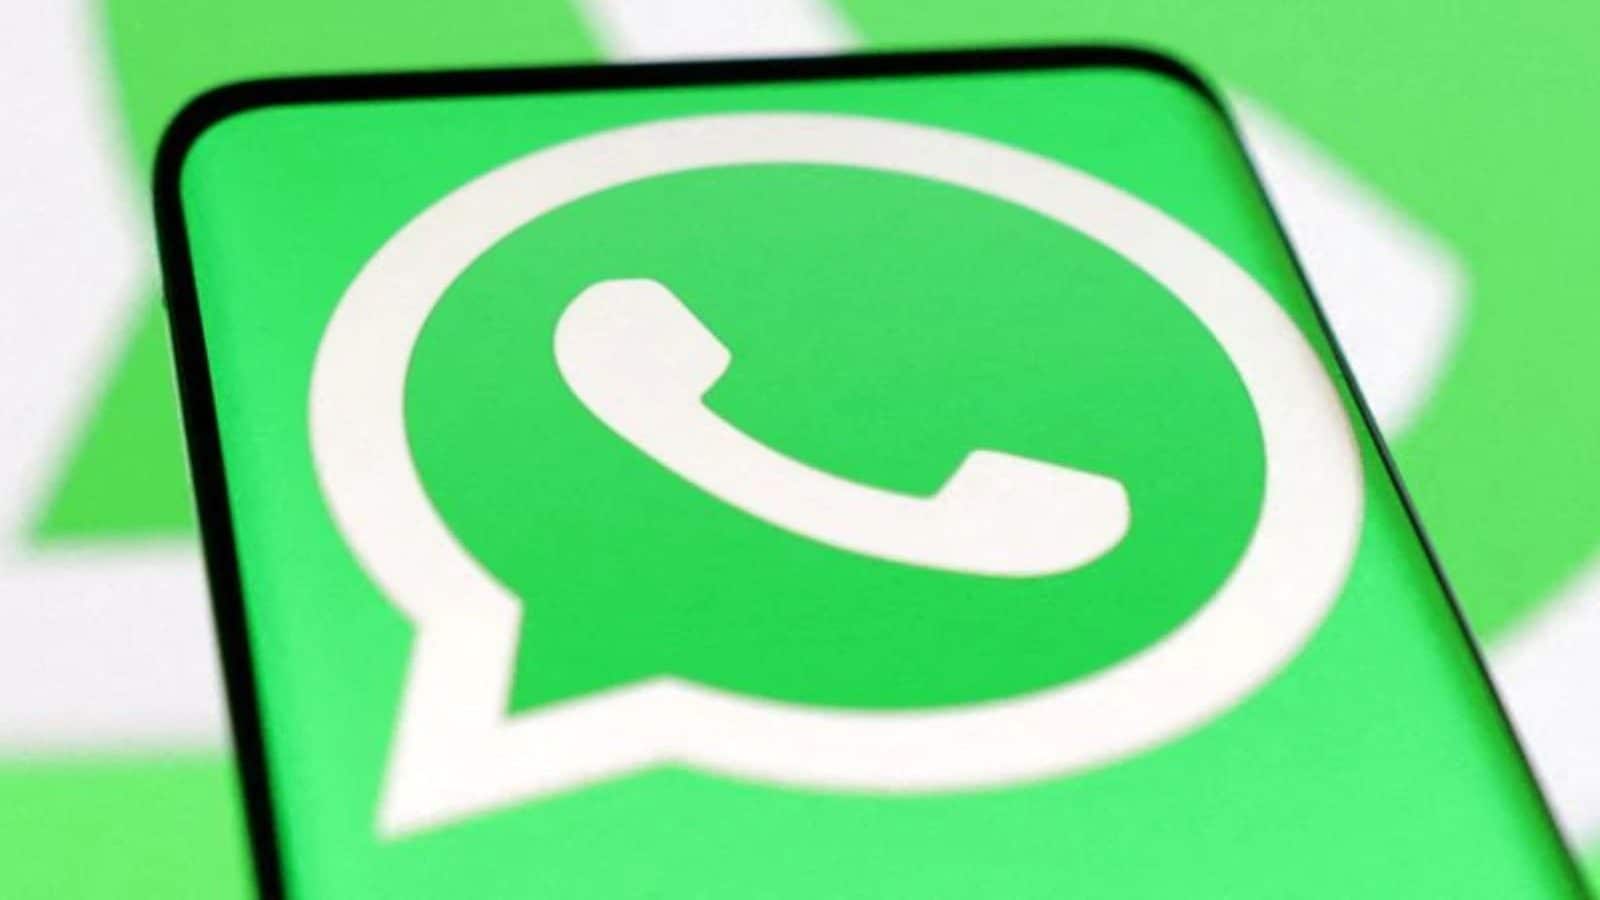 SC directs WhatsApp To Give Wide Publicity To Its 2021 Undertaking To Centre On Privacy Policy